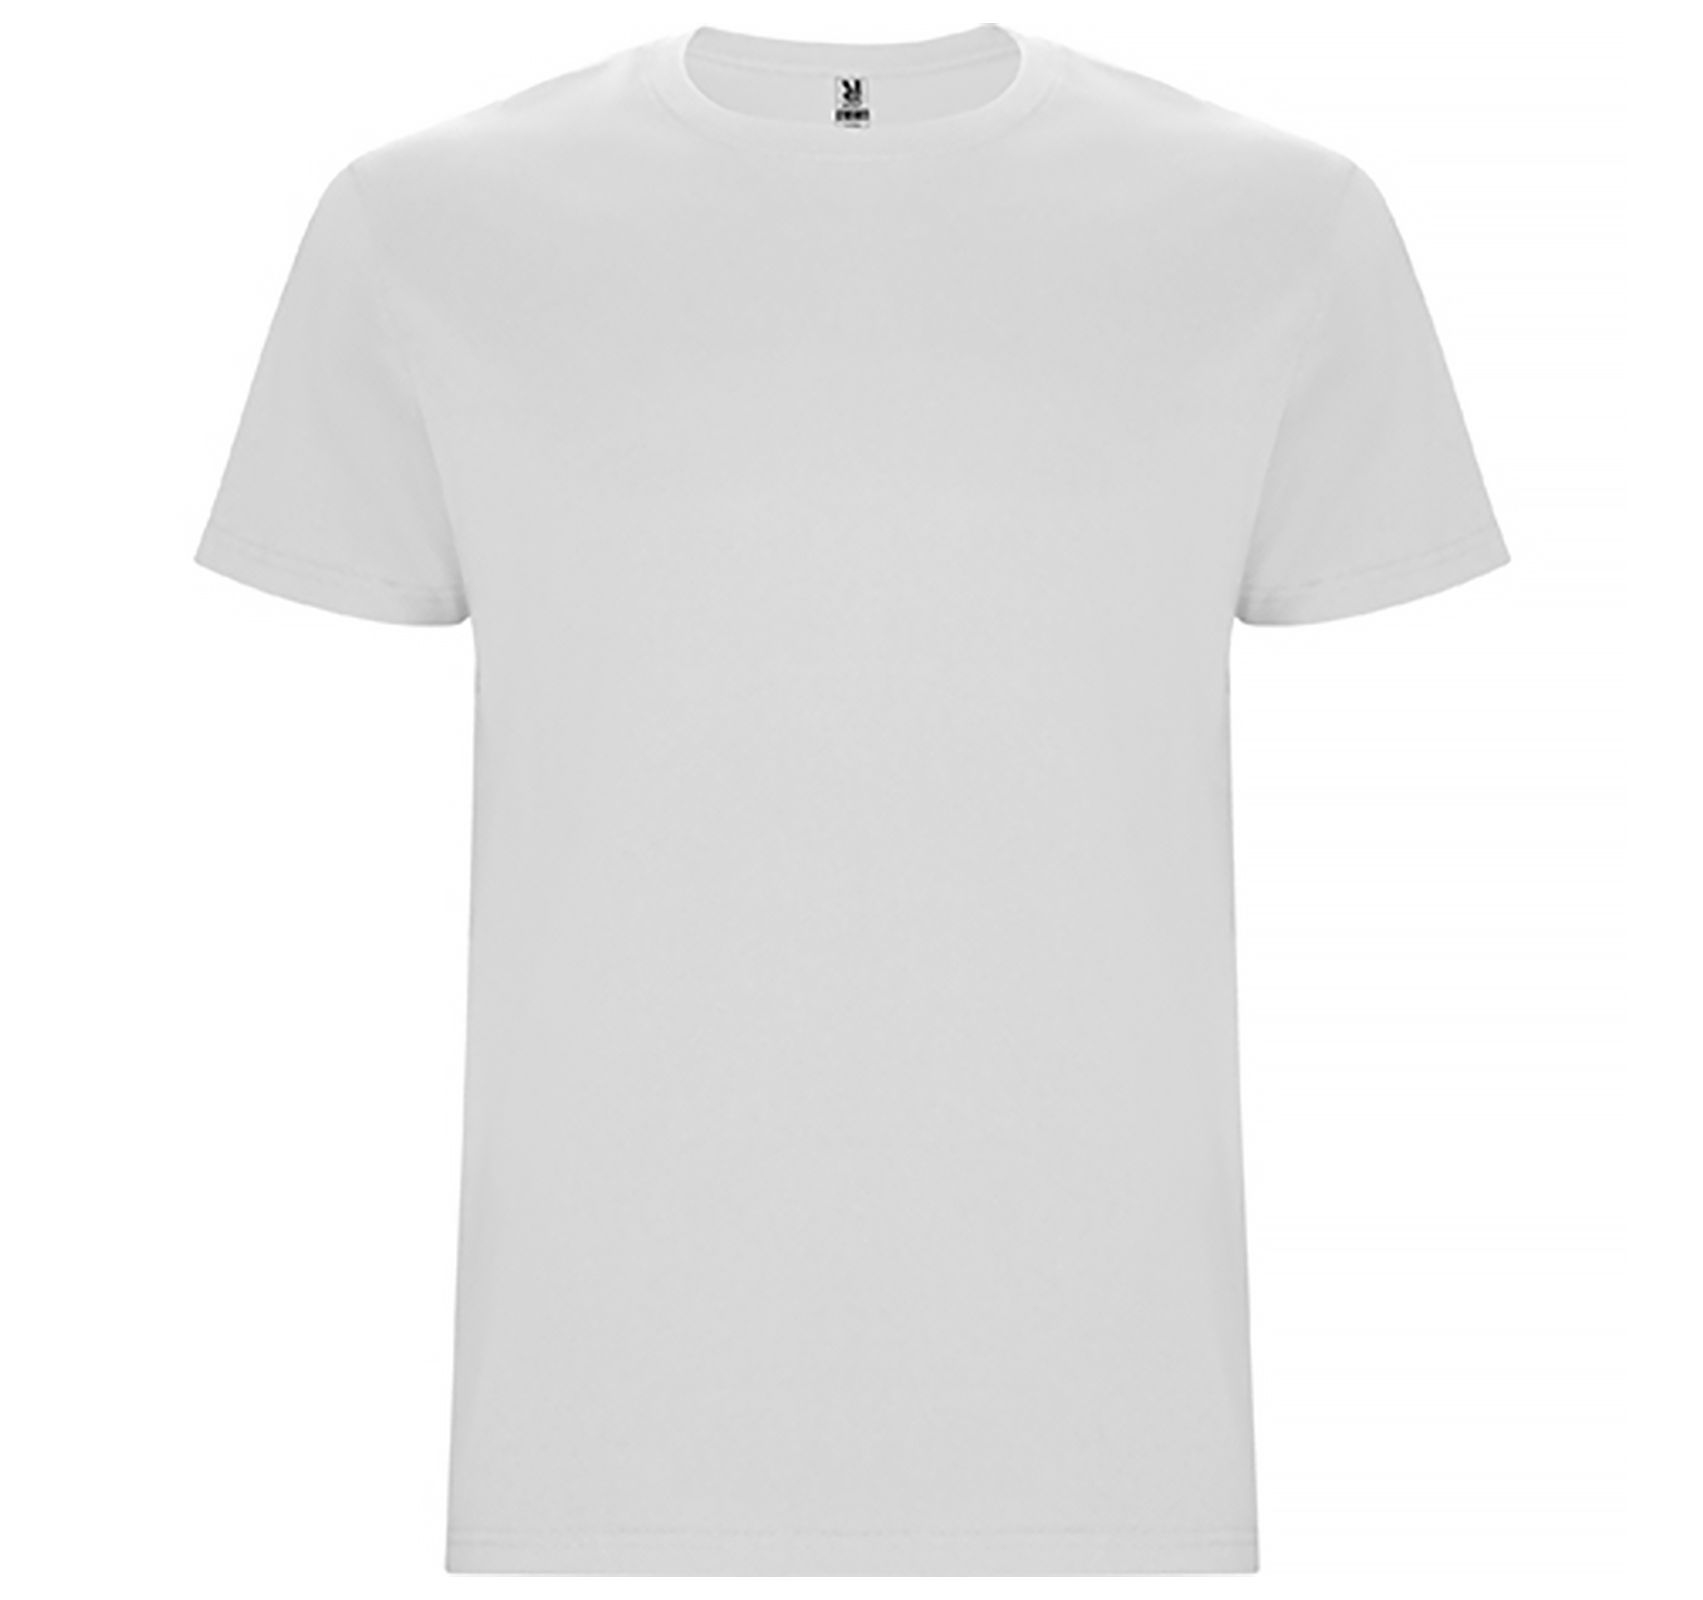 Stafford 190 t-shirt with your LOGO